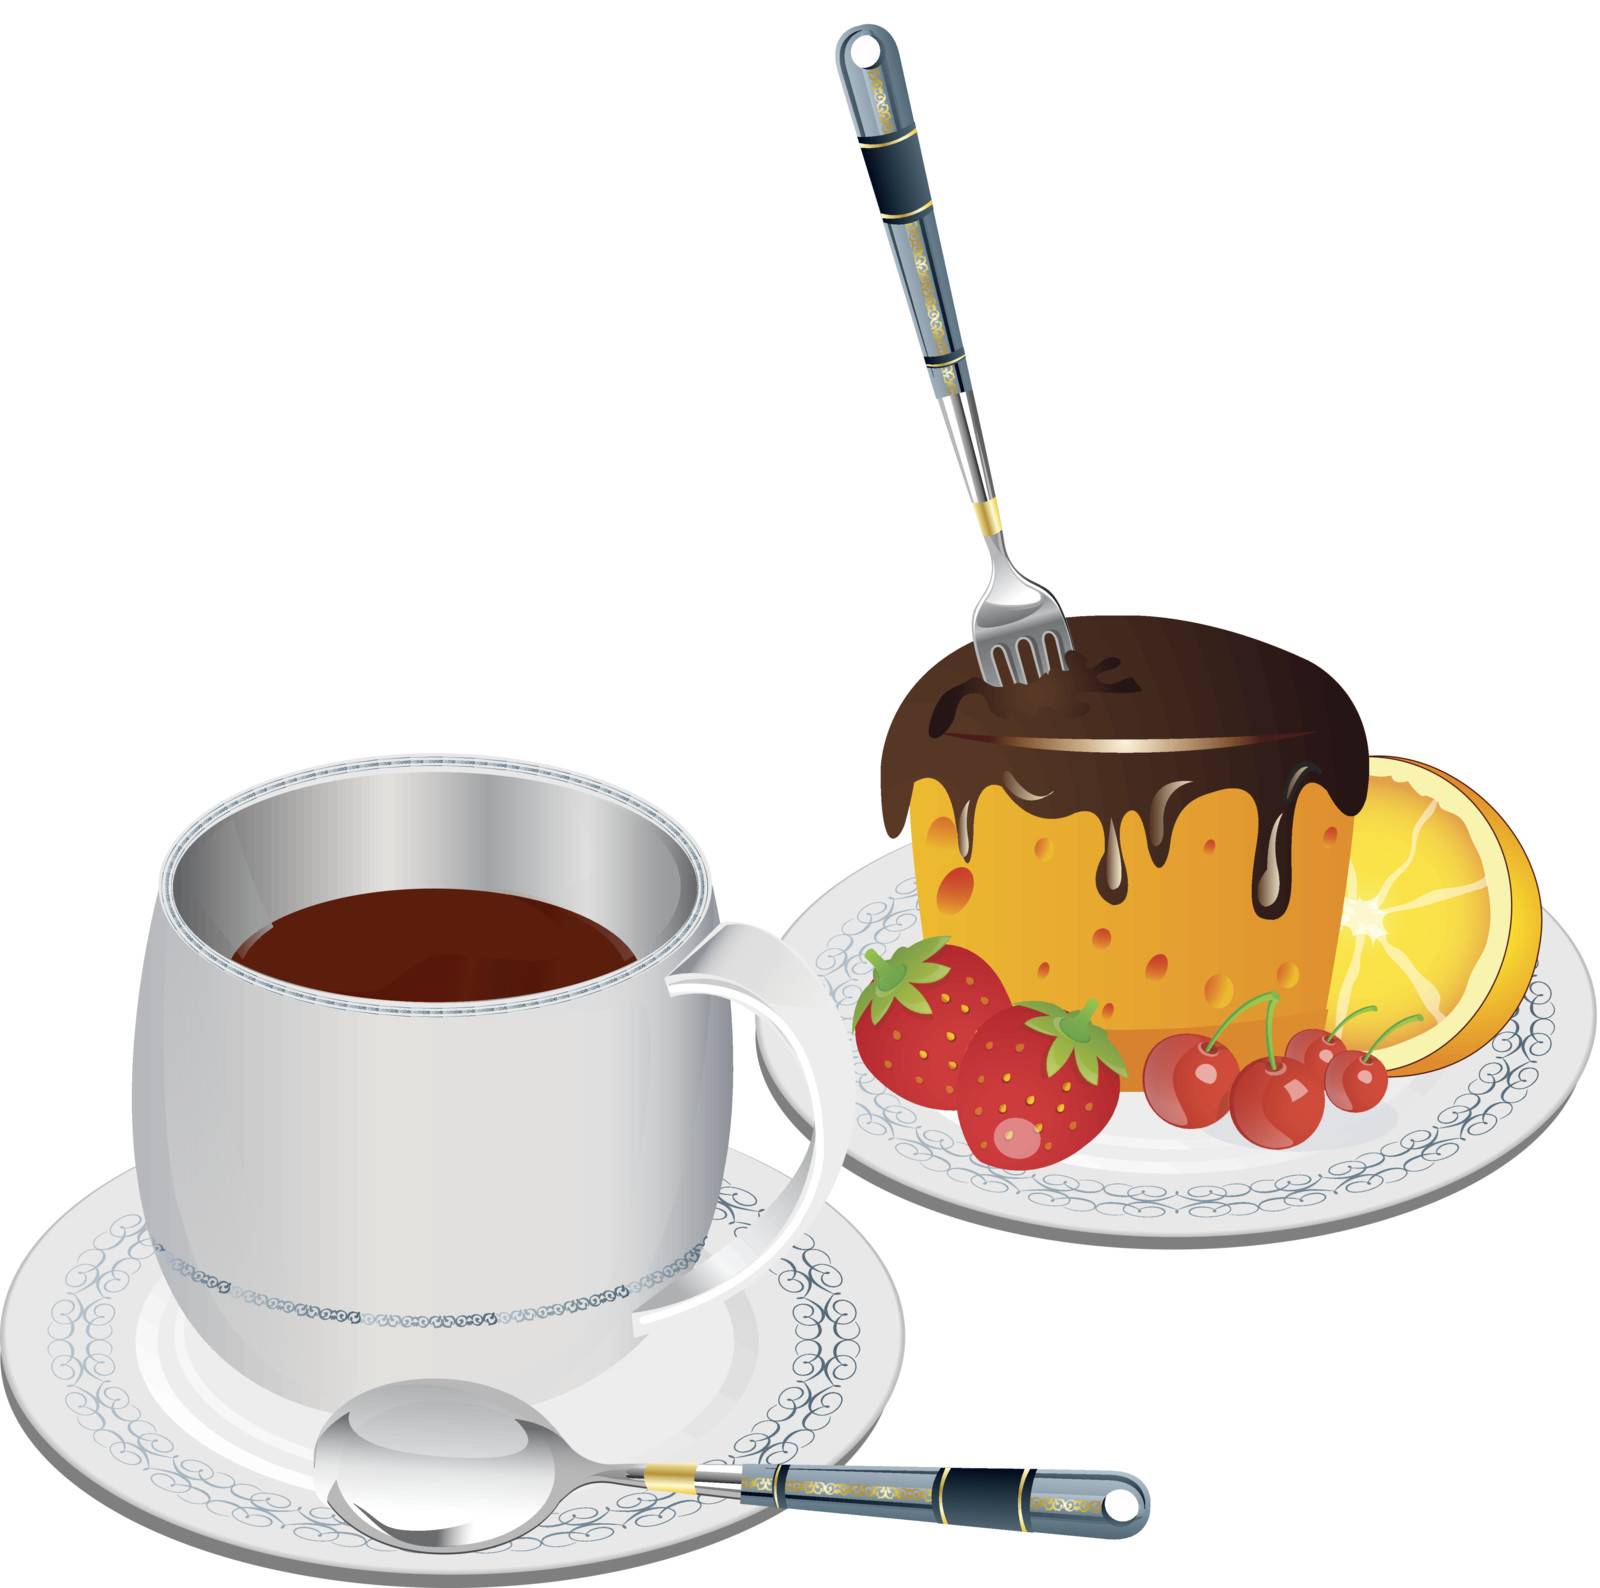 Clip art image of a cup of coffee and slice of fruit cake